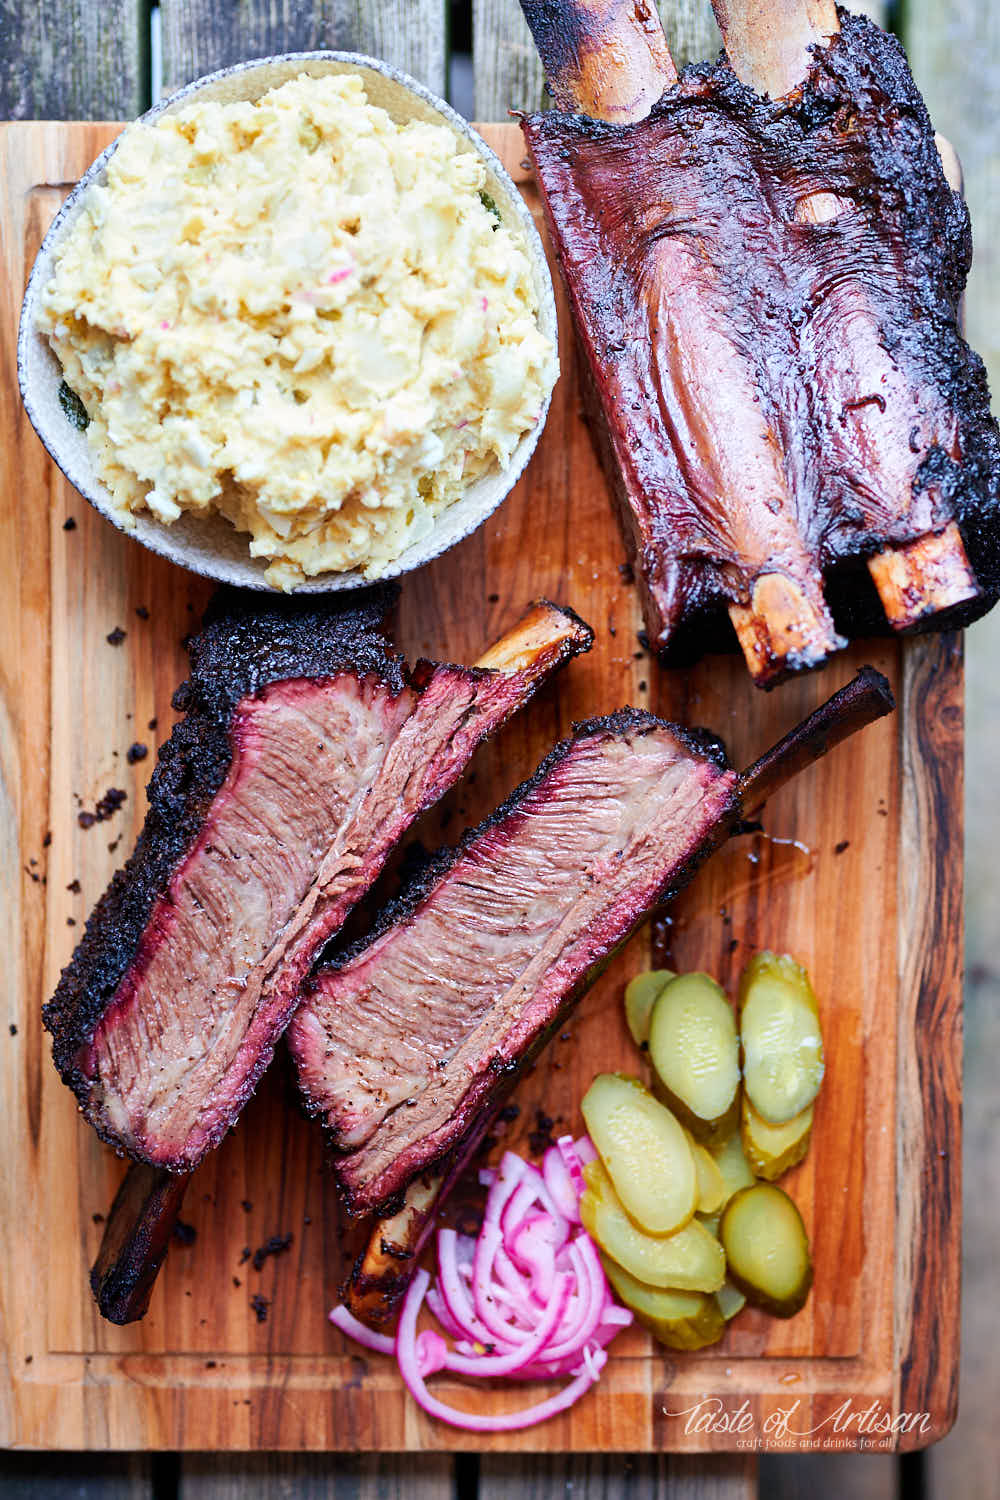 Sliced beef short ribs on a serving board with potato salad, pickles and pickled red onions.